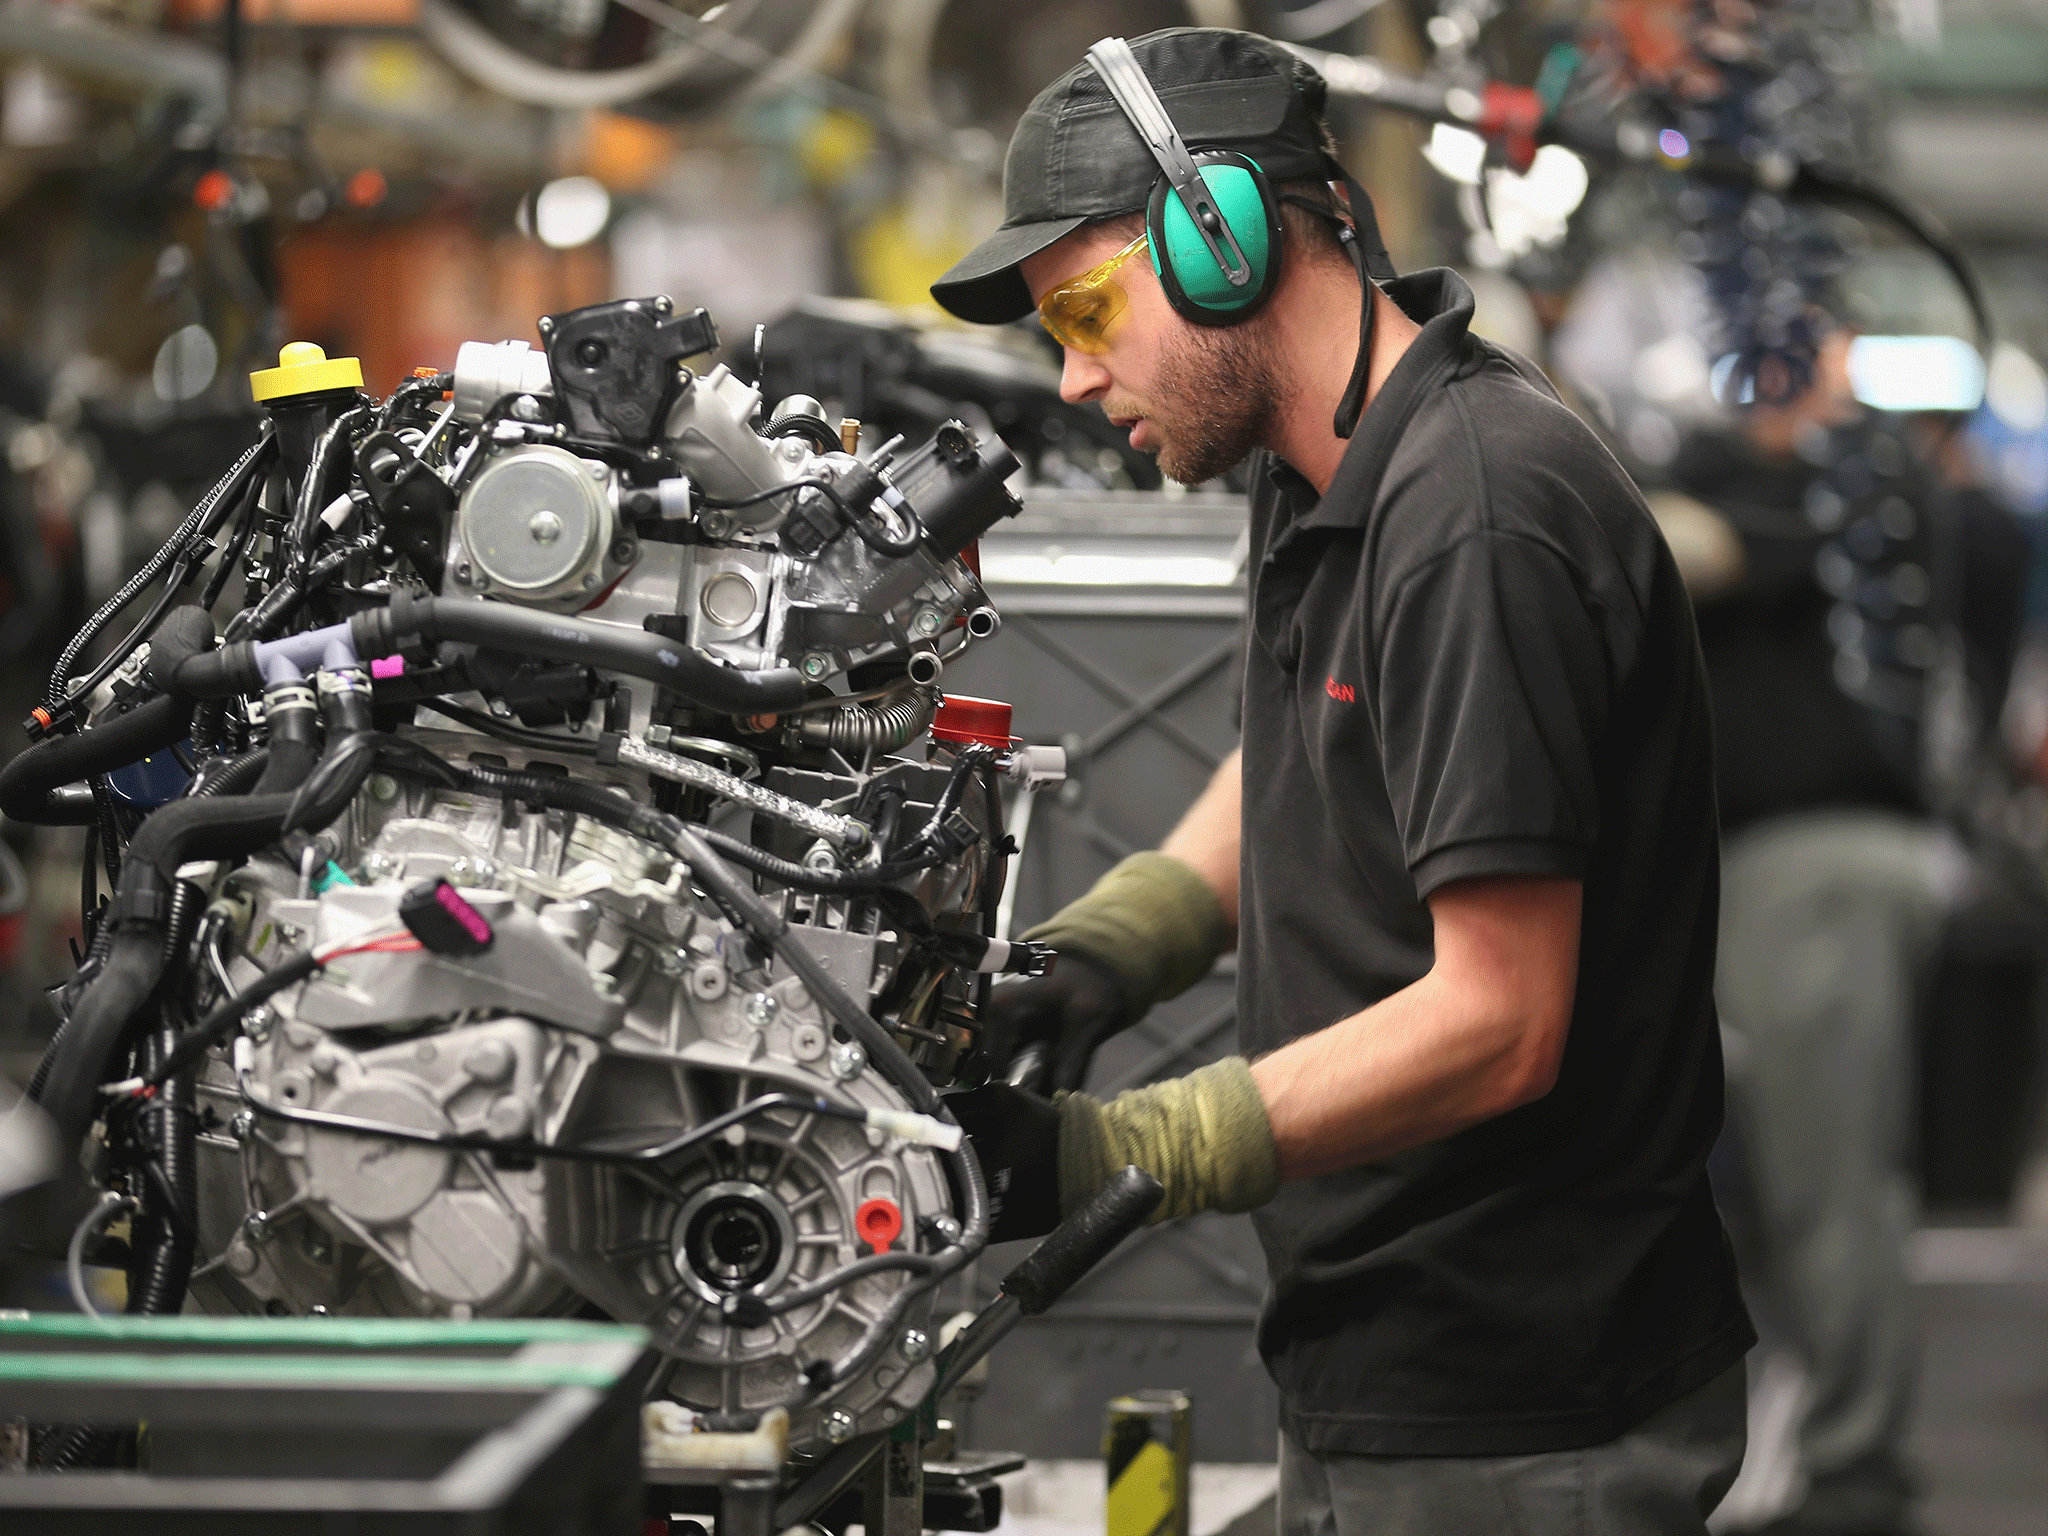 Manufacturers say they will scale back investment as political uncertainty around Brexit grows